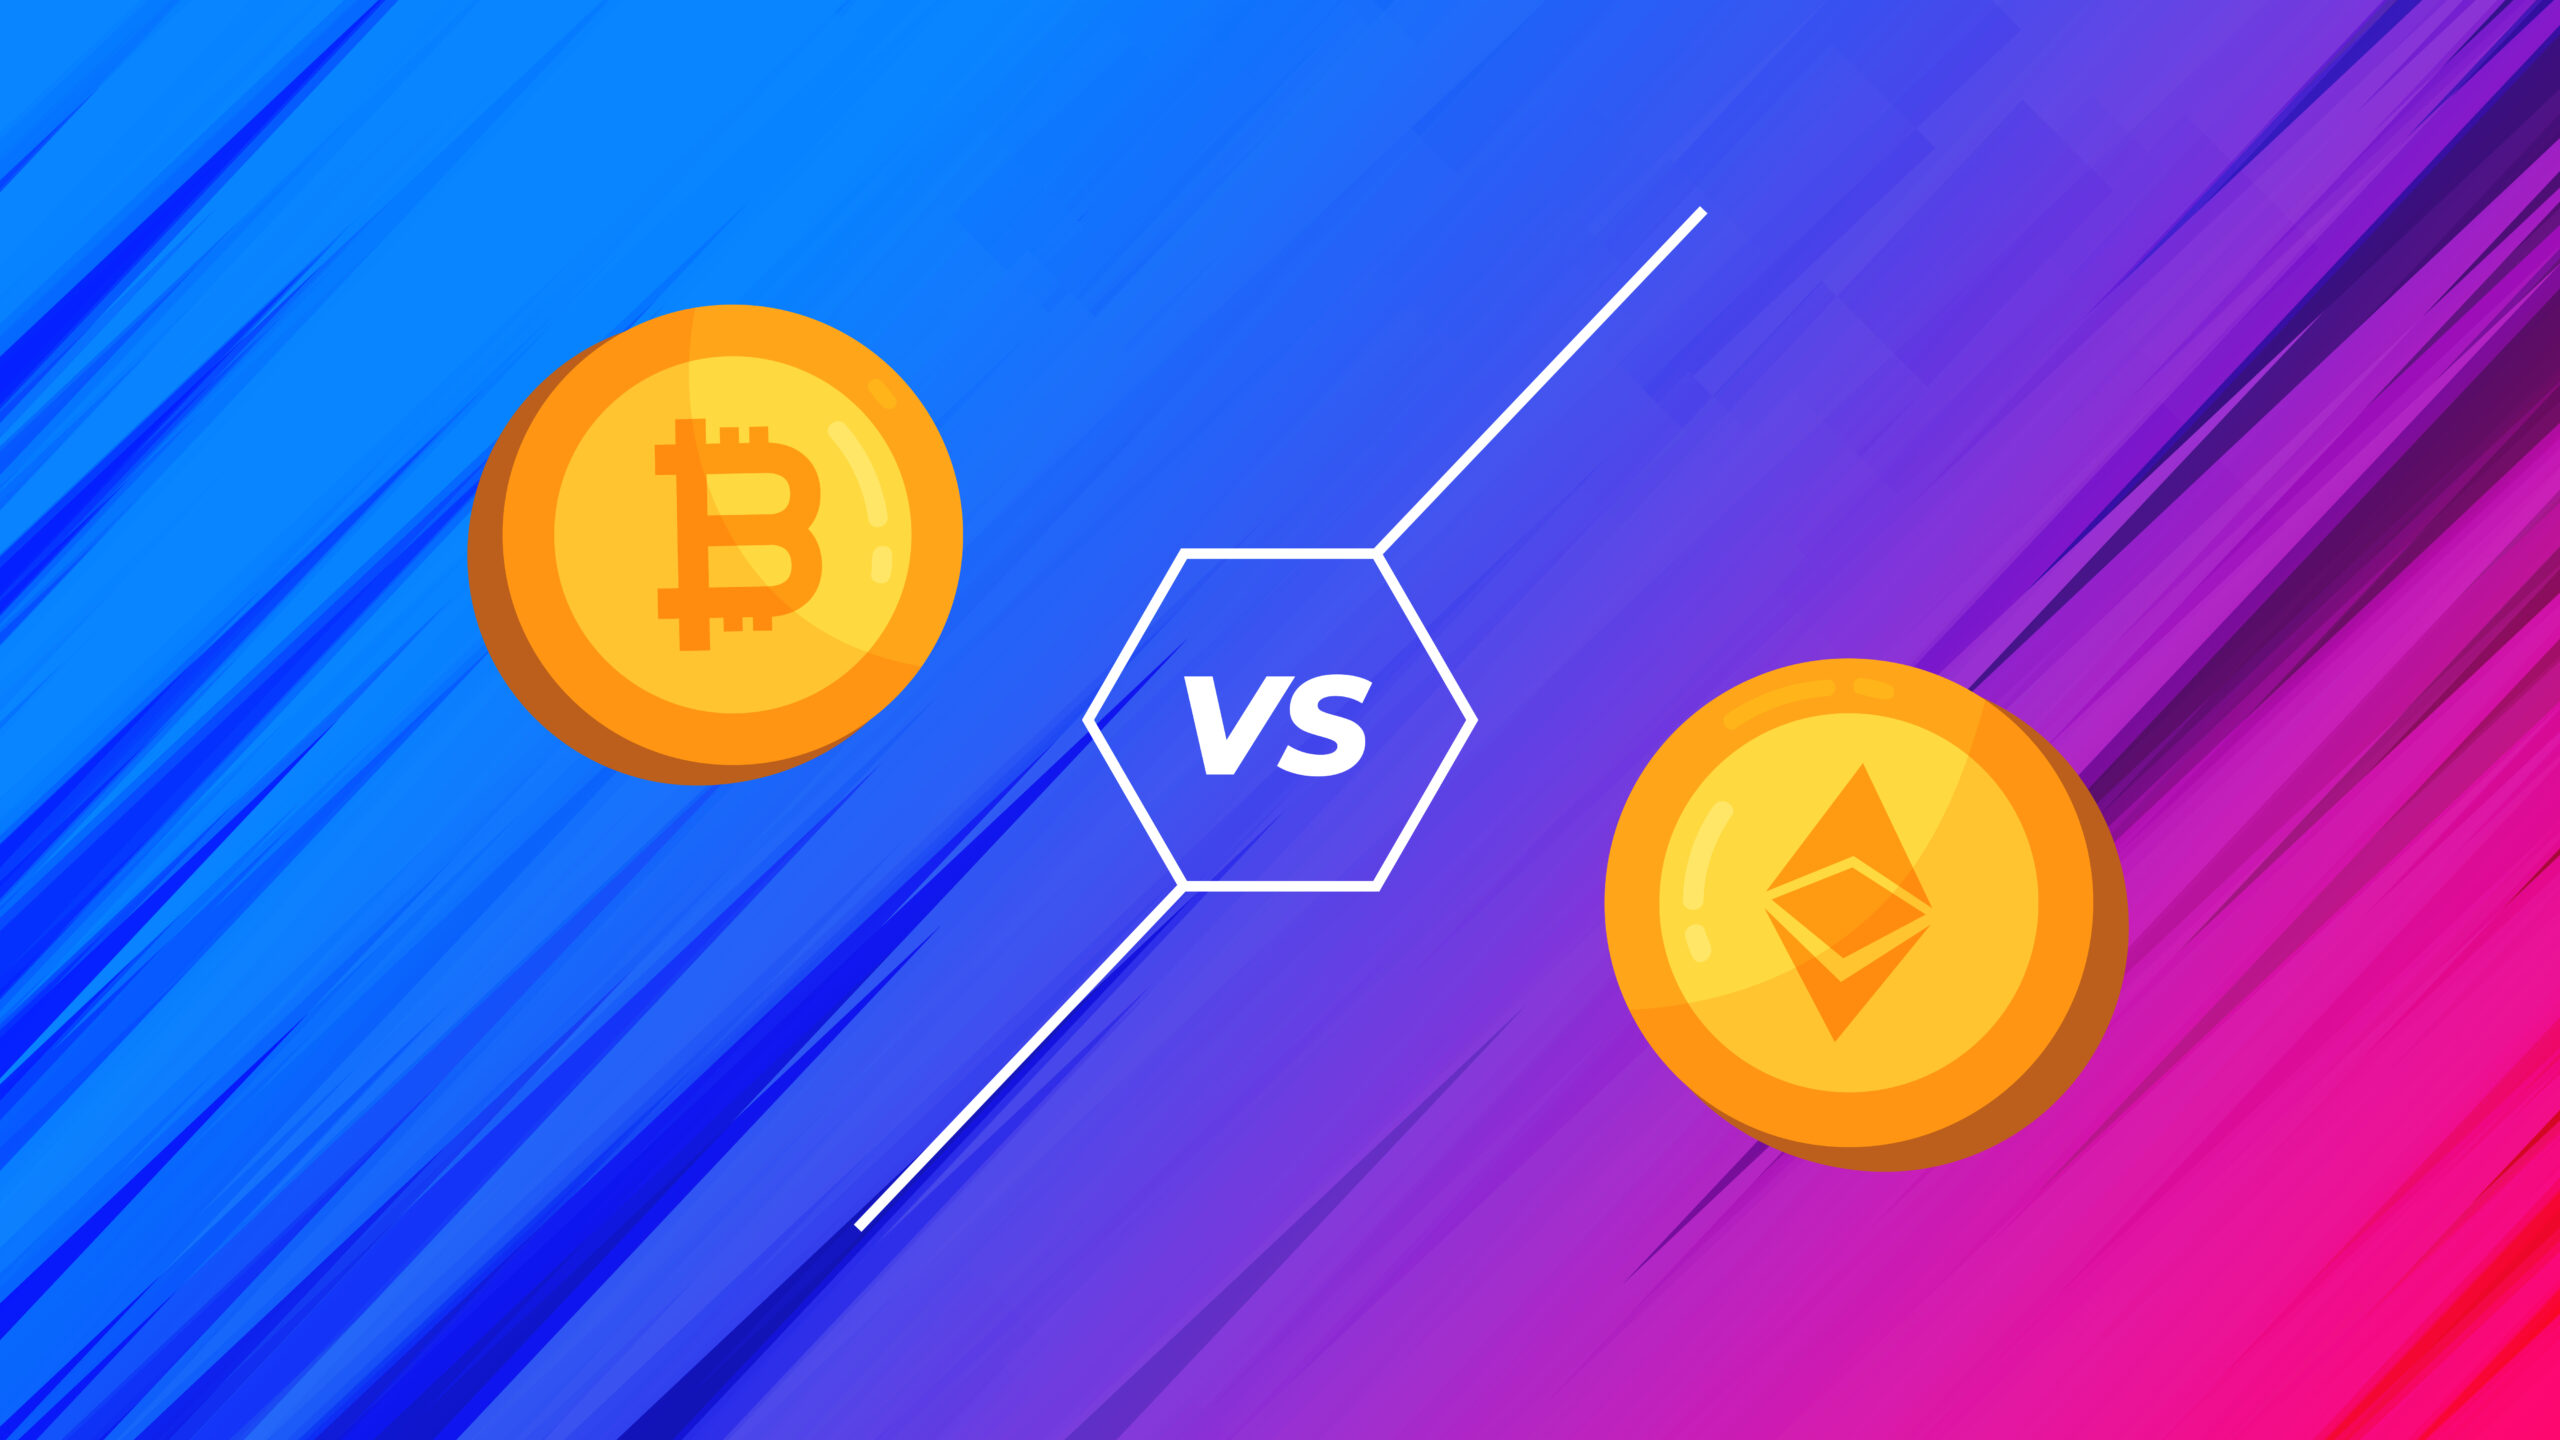 Let’s take a look at Bitcoin vs Ethereum